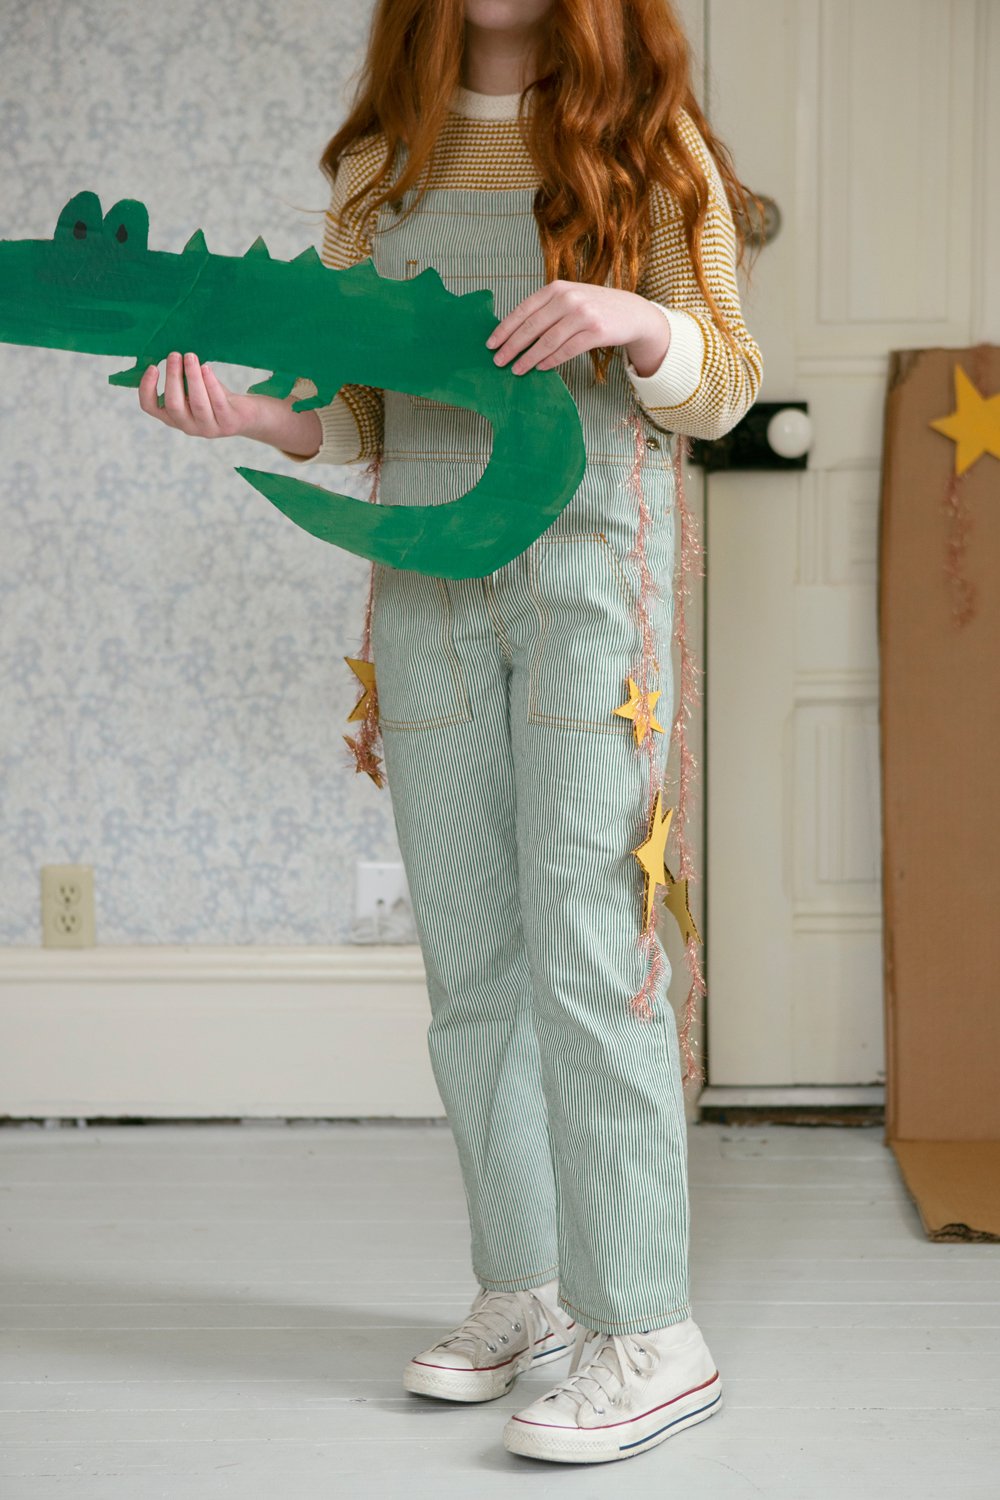 Fin and Vince Classic Overalls Fern Stripes | 30% OFF | Size 6-7y, 8-9y | Children of the Wild